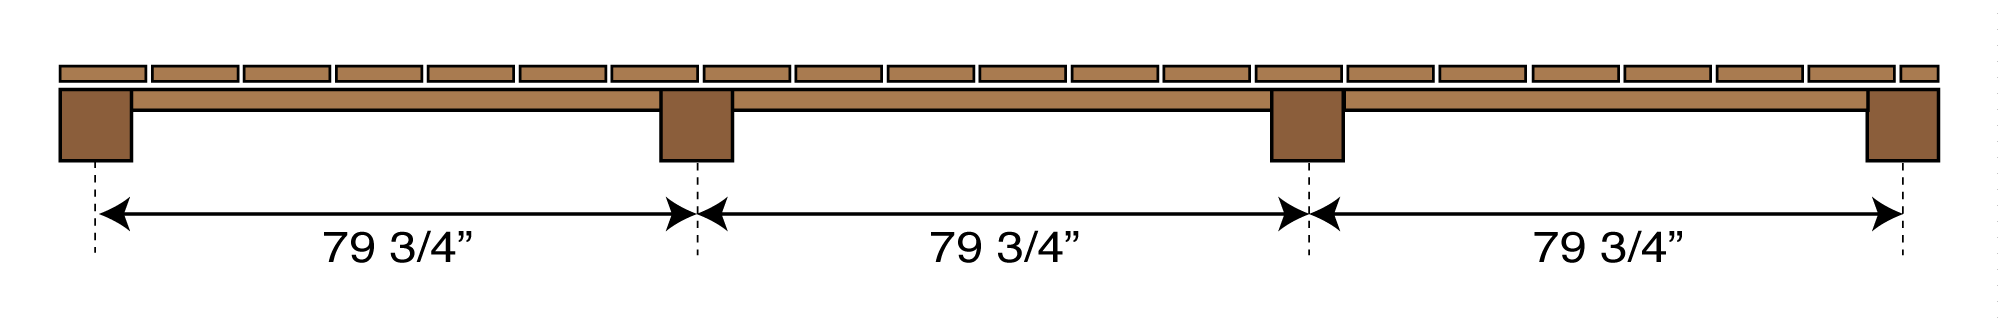 drawing showing the distance between fence posts